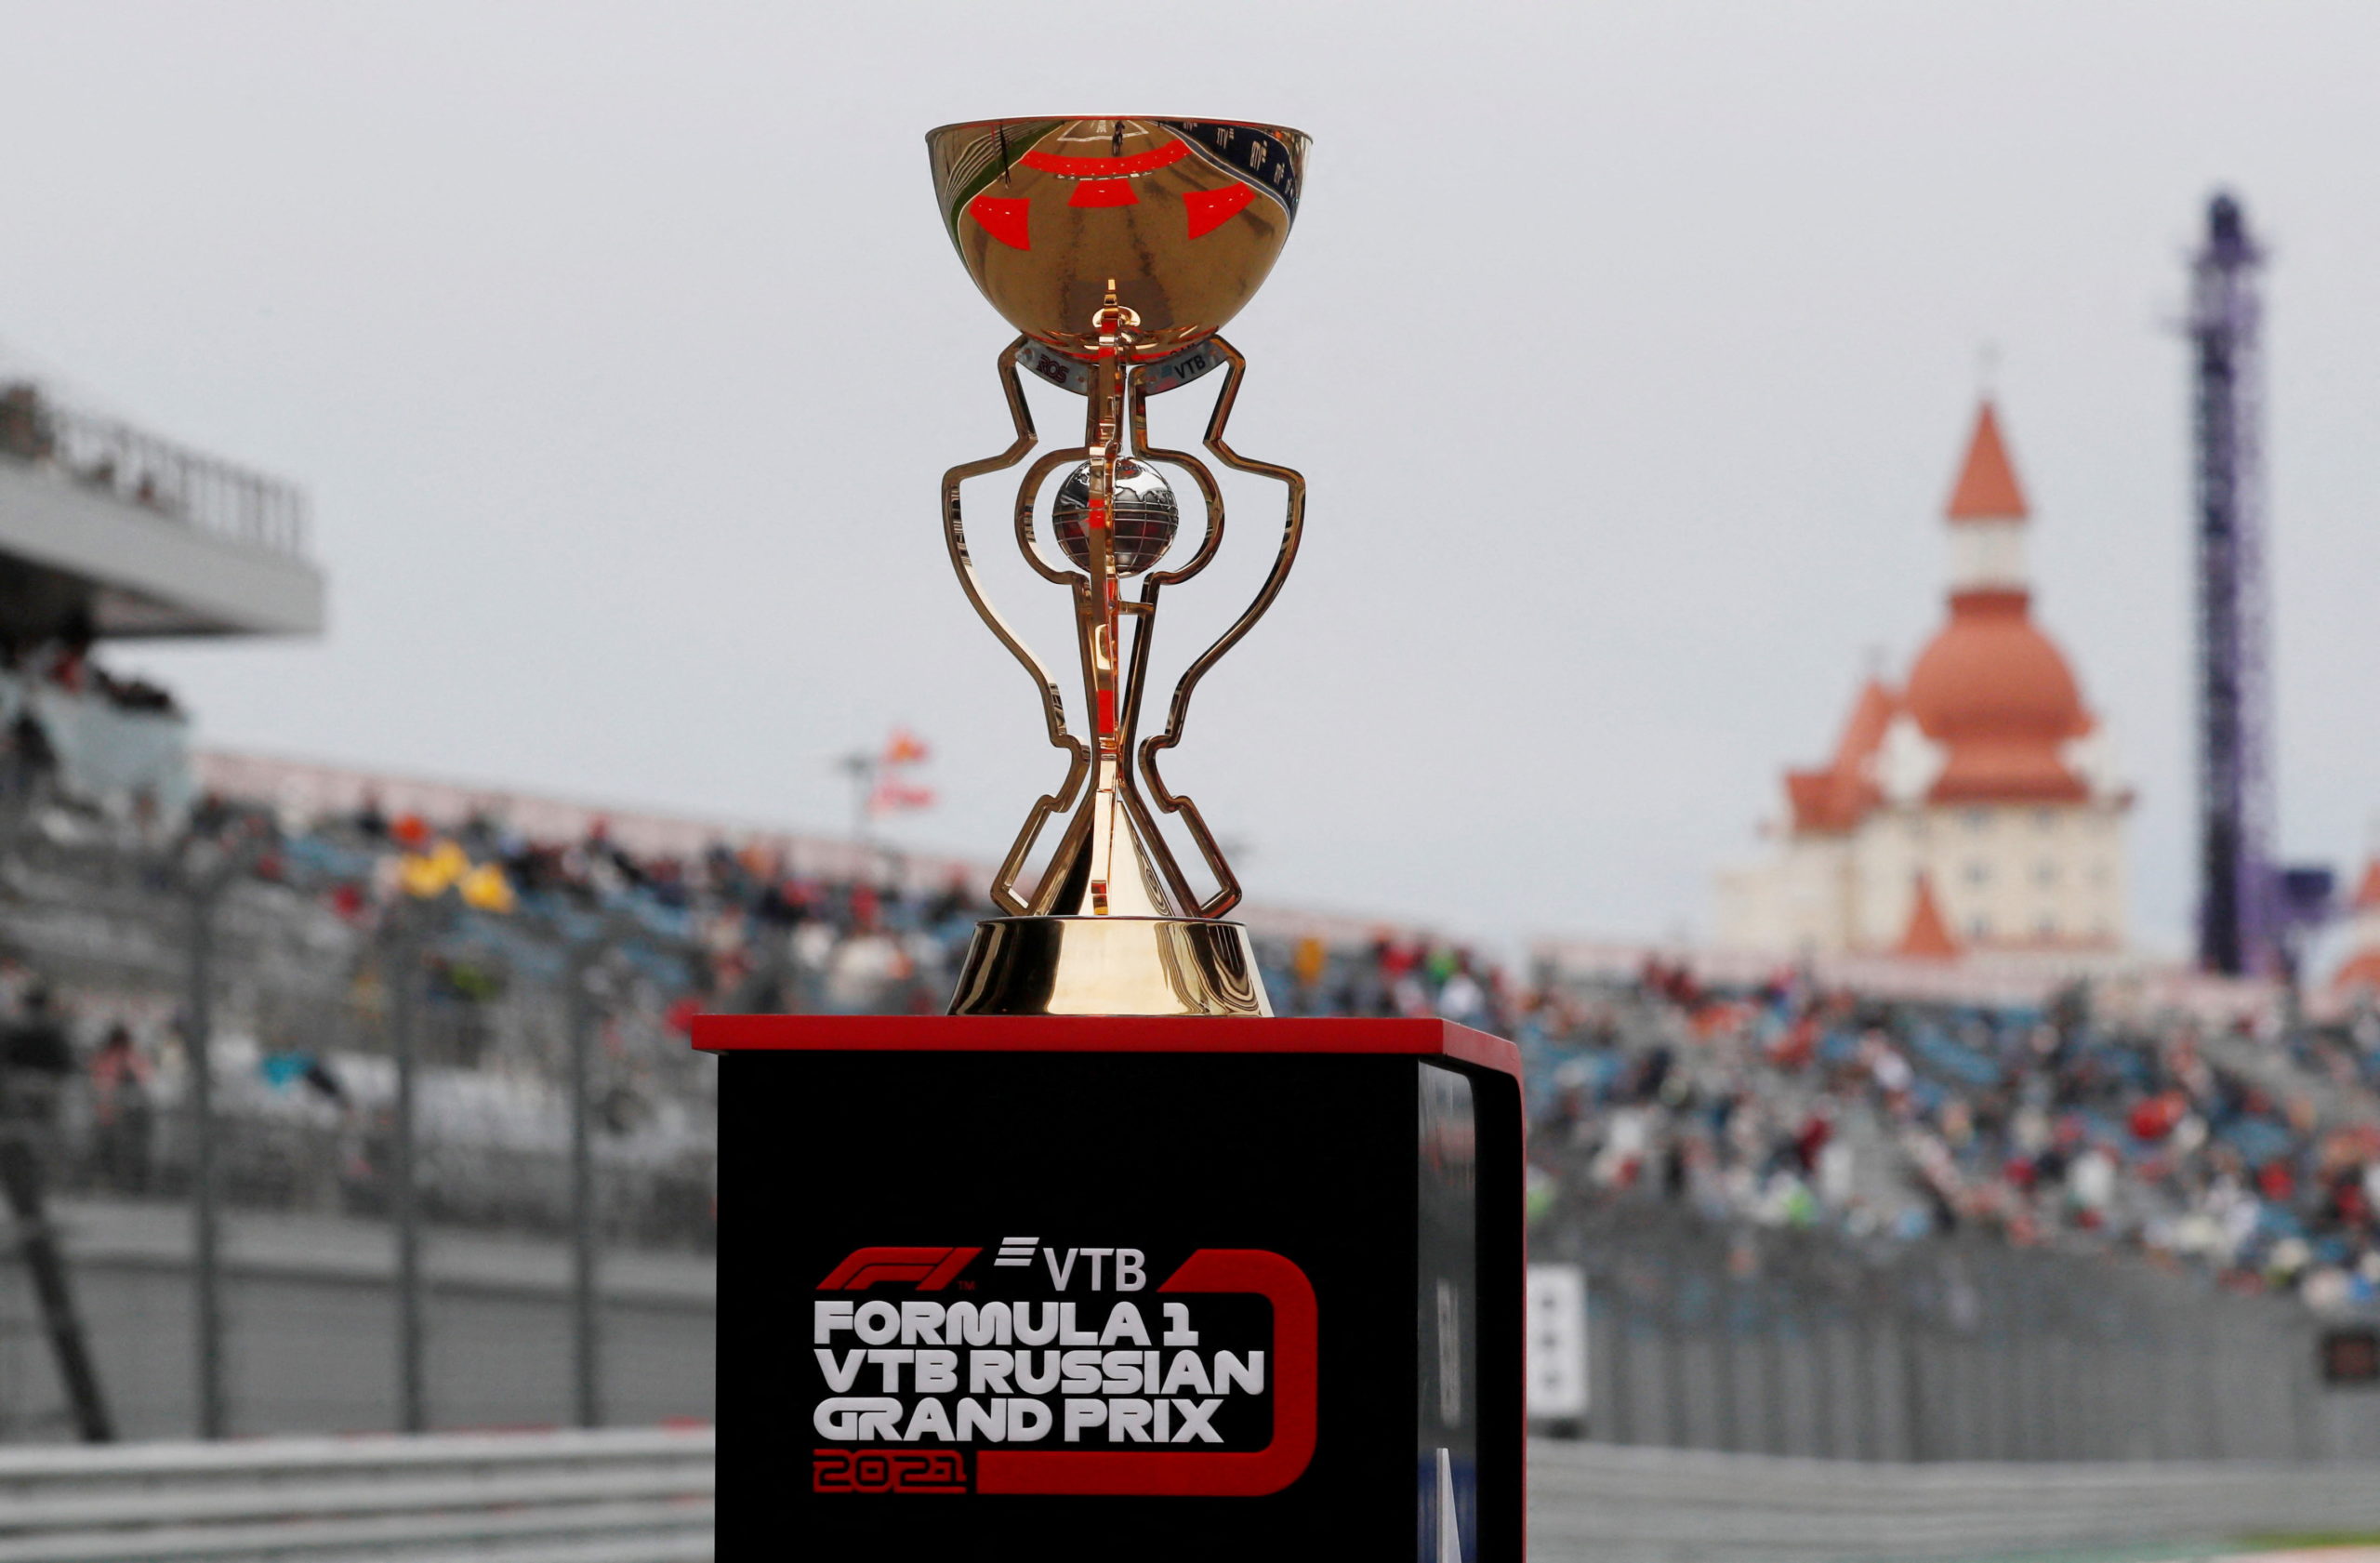 a One F1 - Russian Grand Prix - Sochi Autodrom, Sochi, Russia - September 26, 2021 General view as the winners trophy is displayed before the race